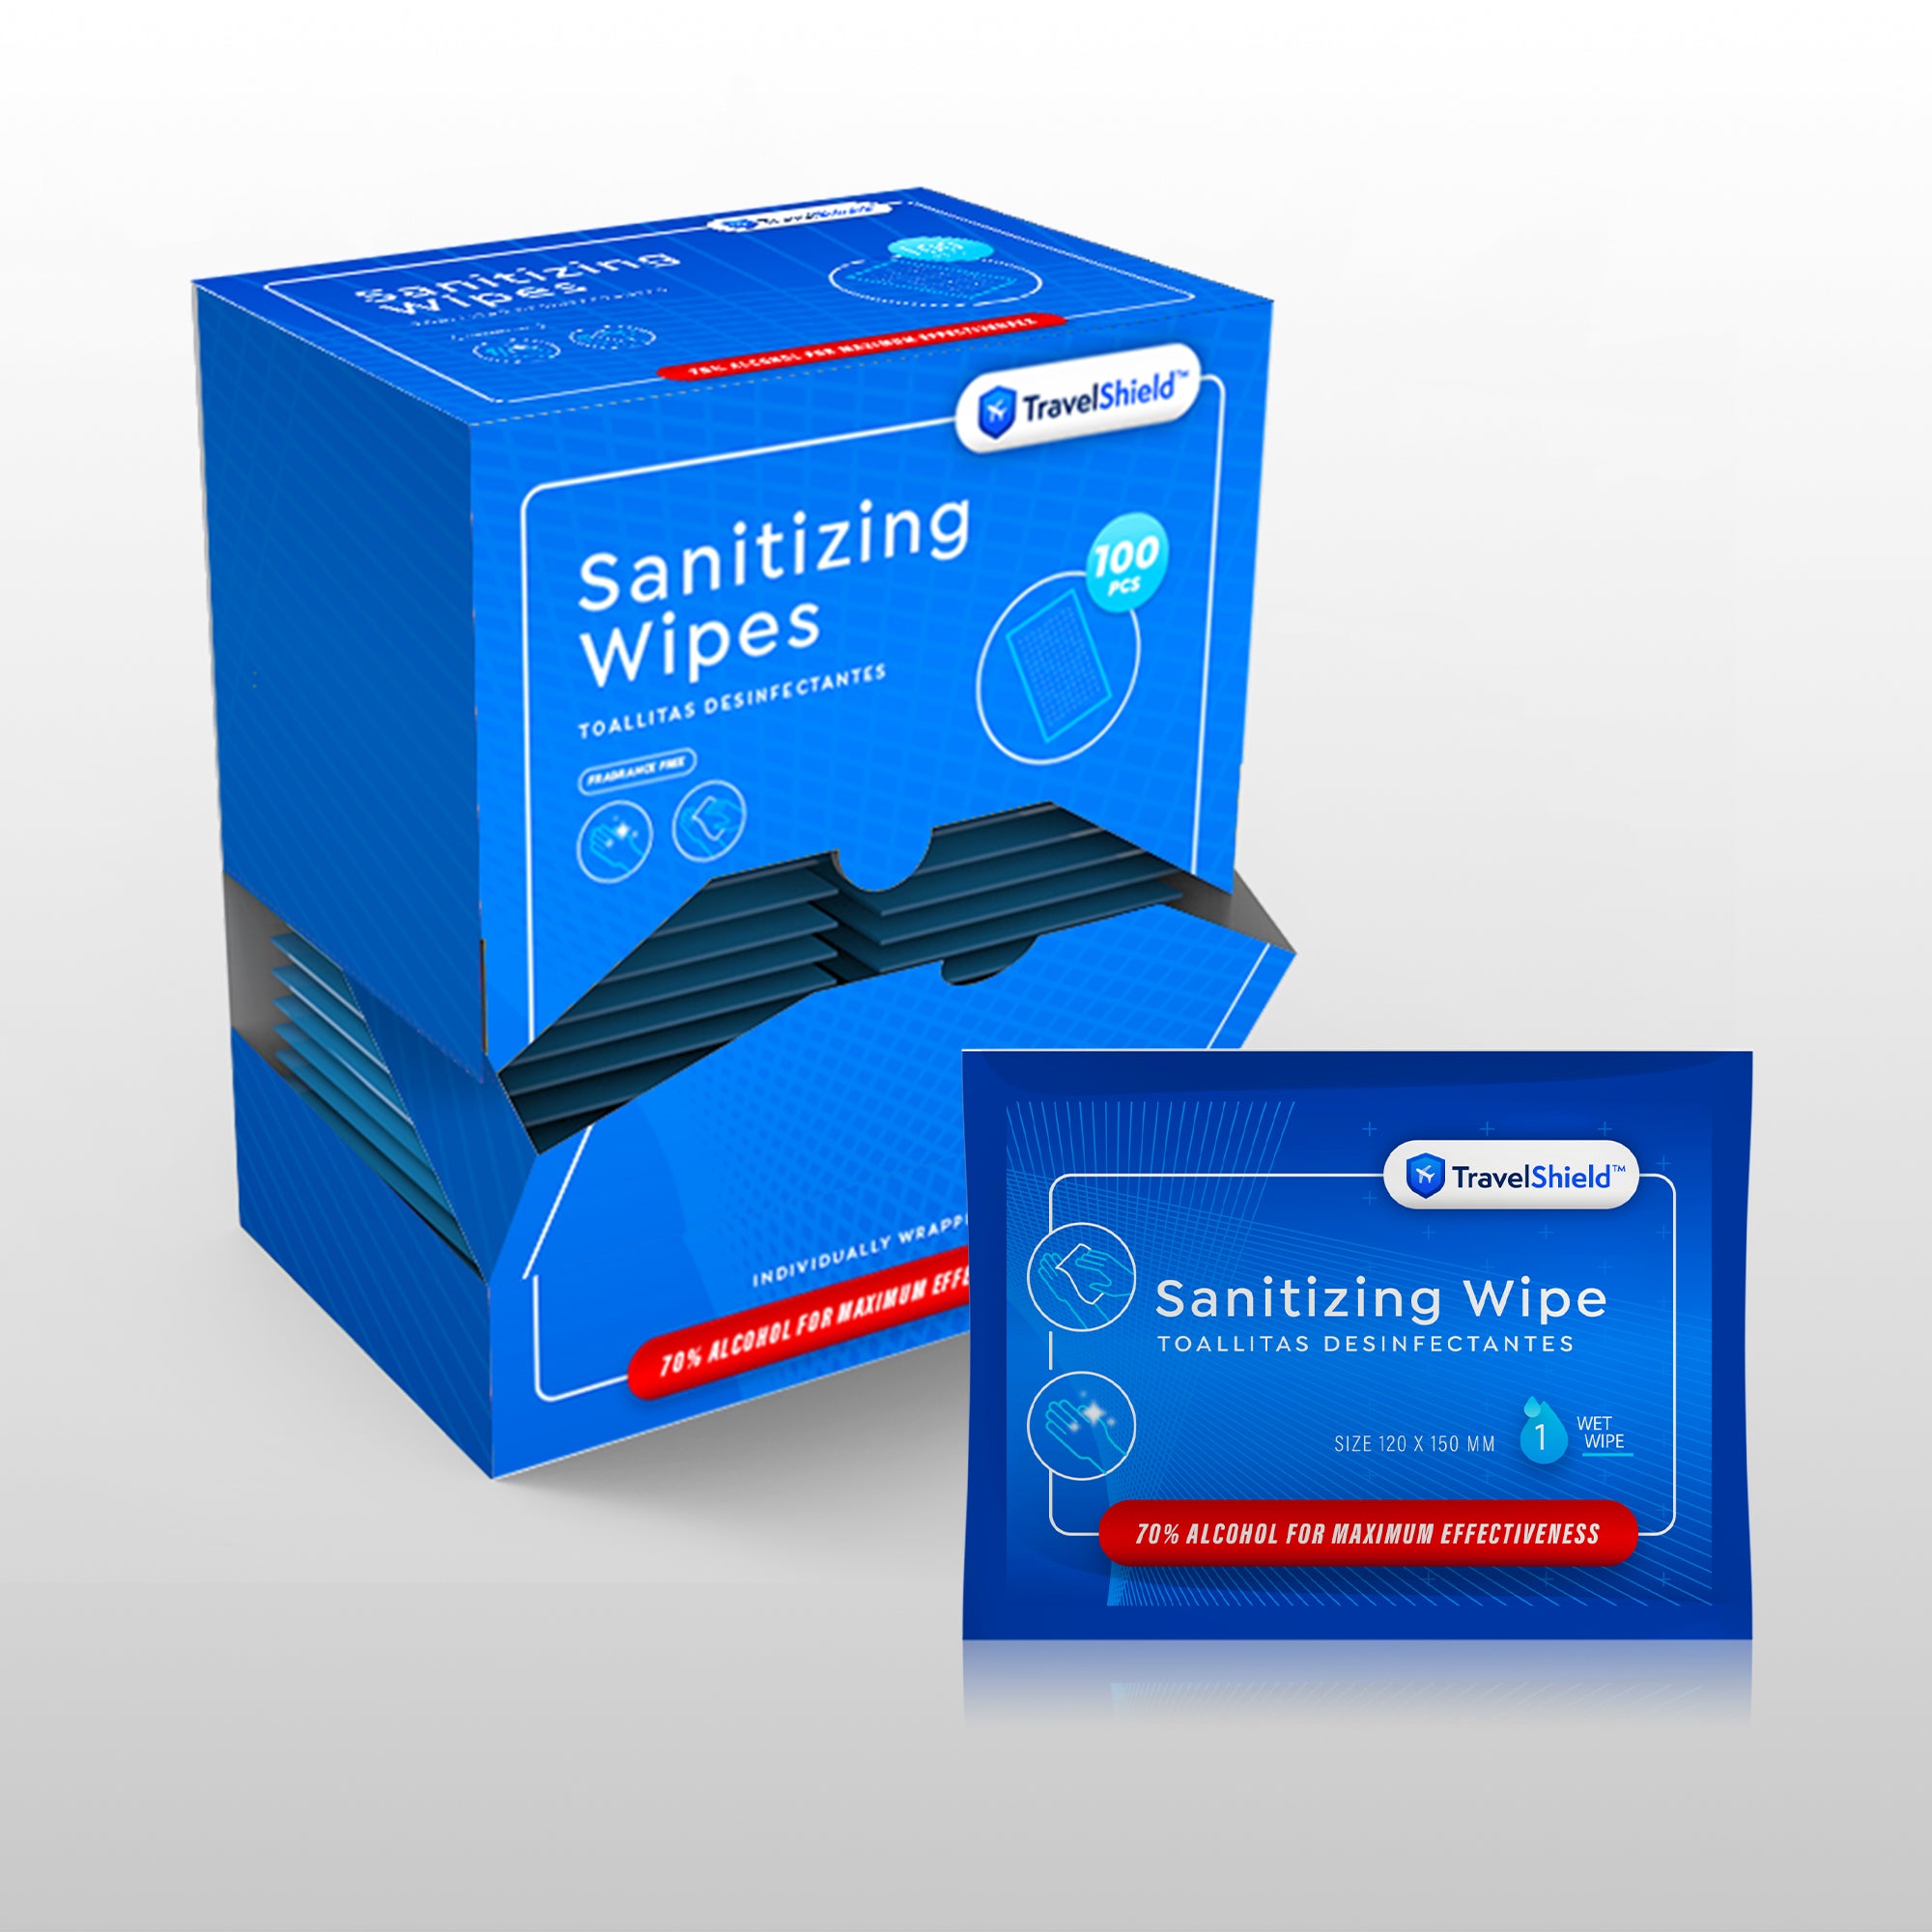 All Natural, Sanitizing Hand Wipes — Wipeys - Travel Wipes